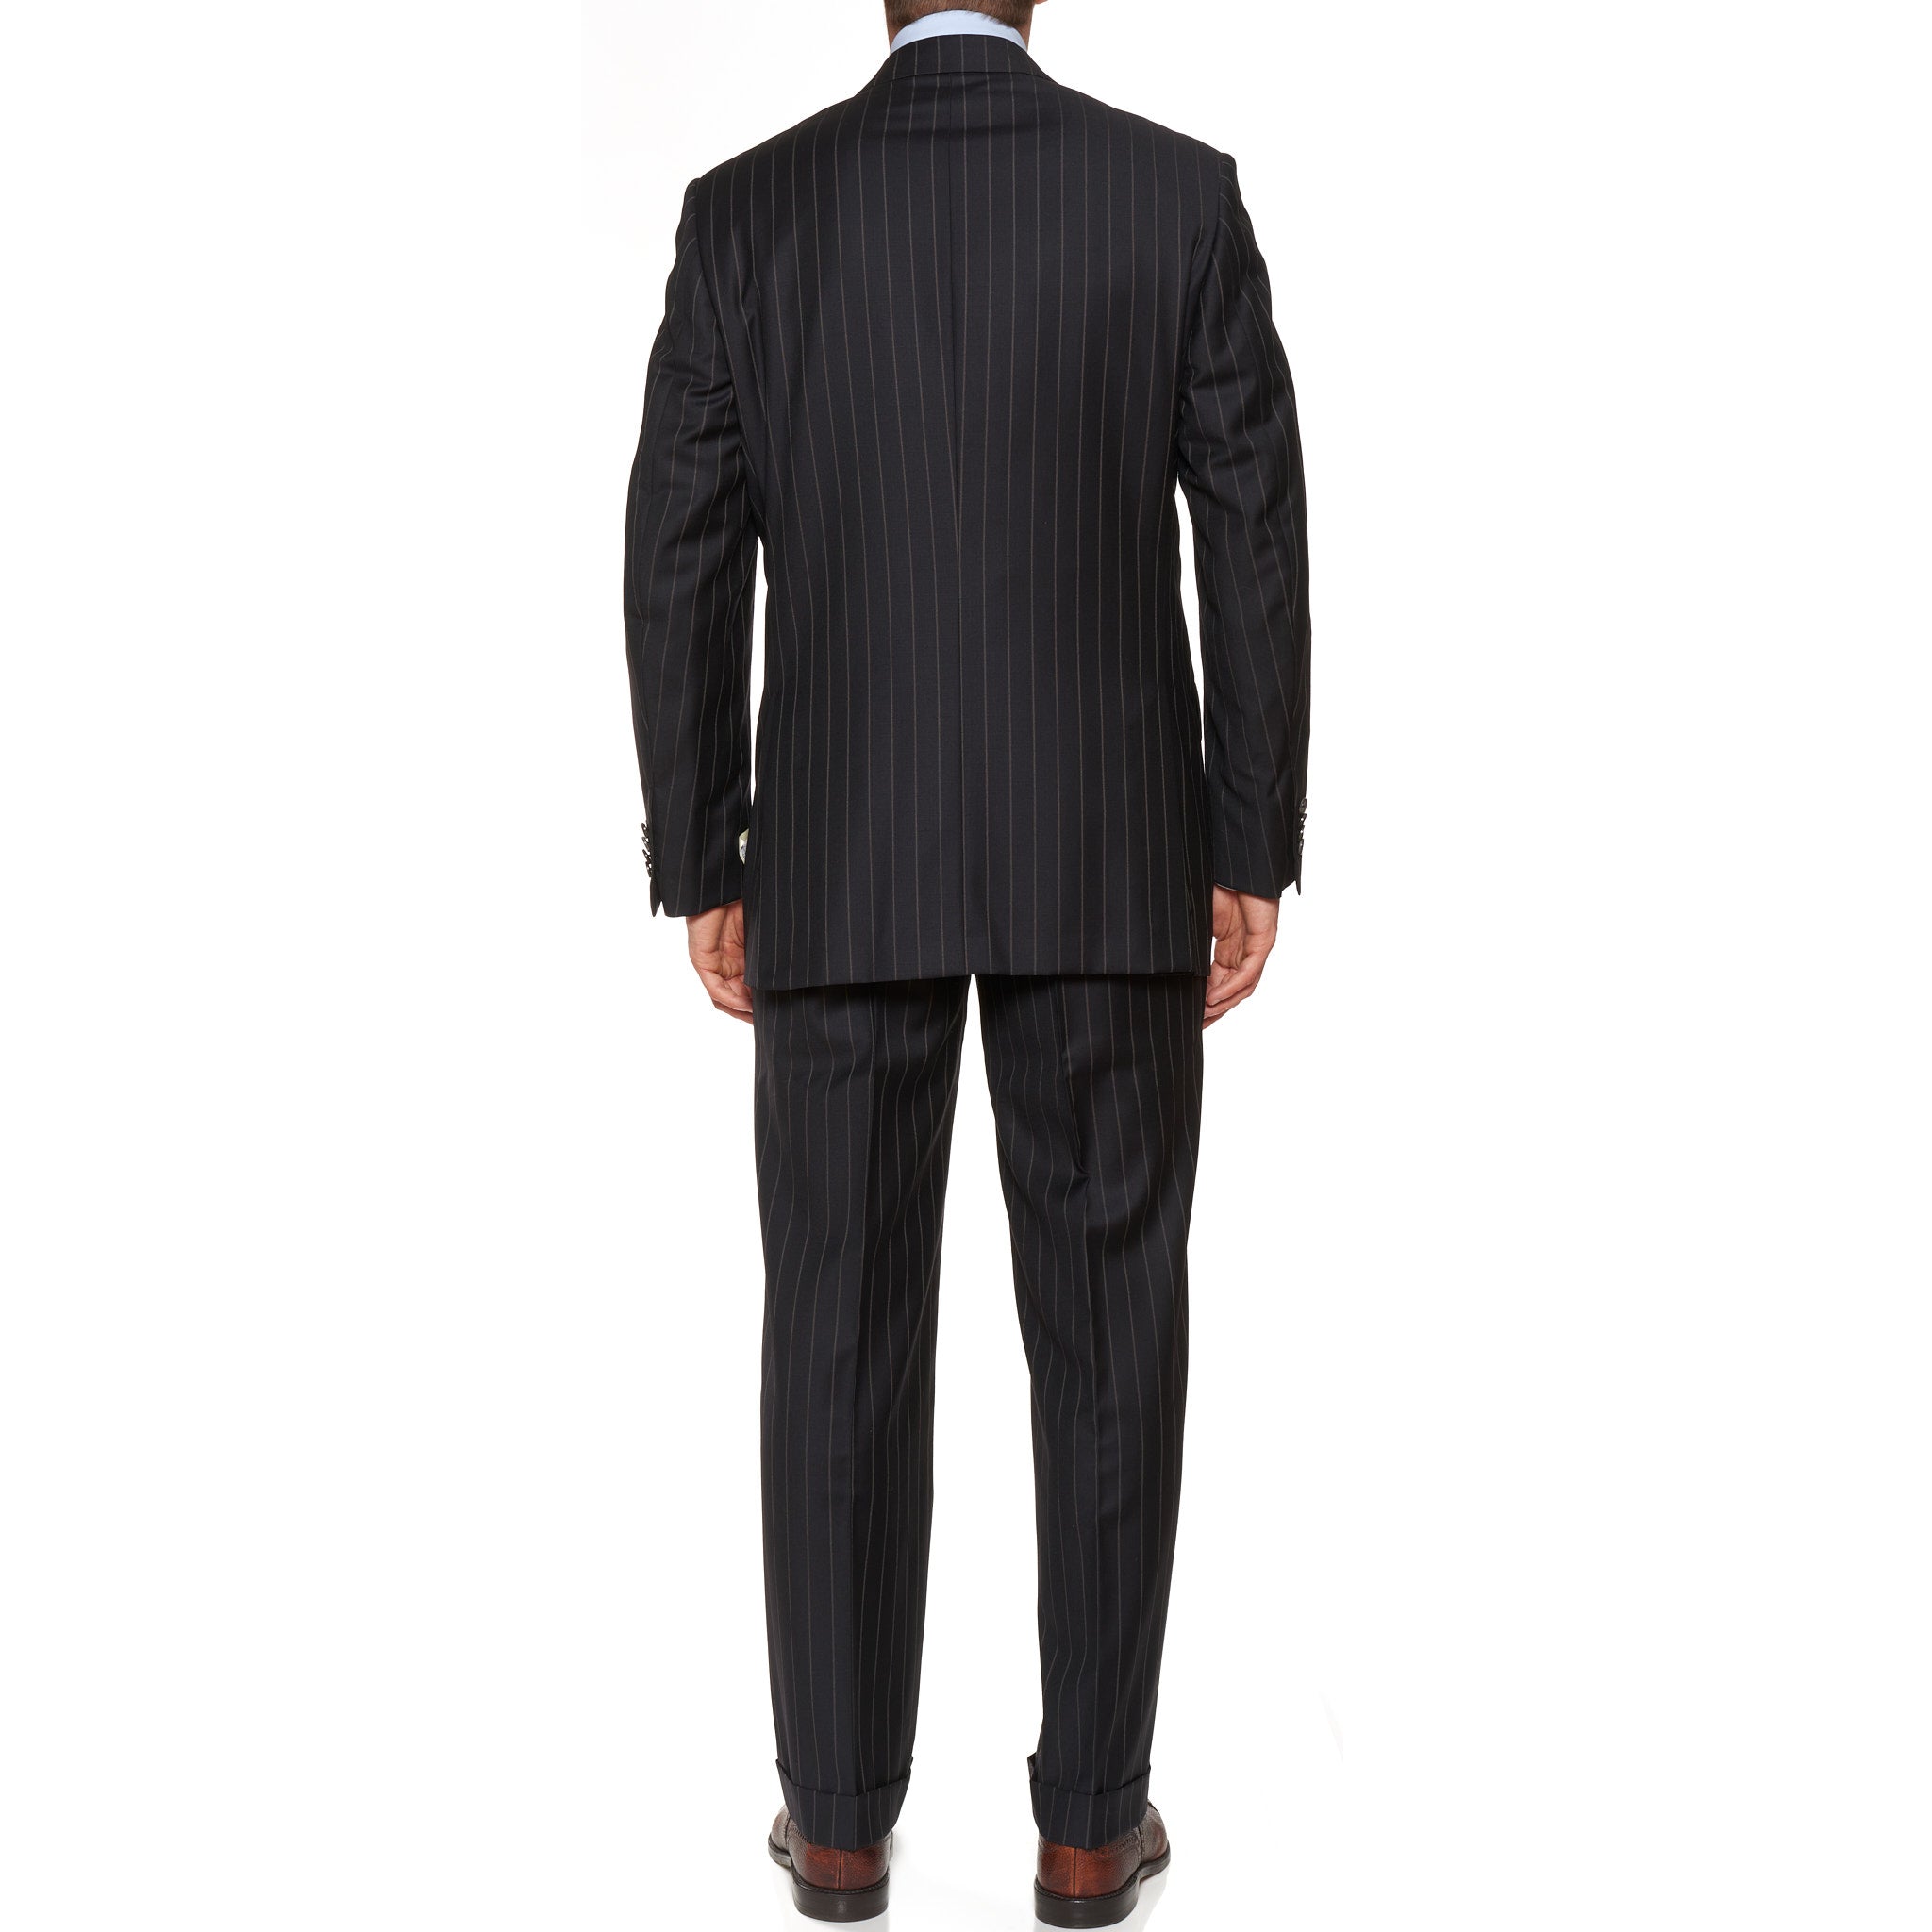 D'AVENZA For PAPE Handmade Black Striped Wool DB Suit EU 52 NEW US 42 D'AVENZA